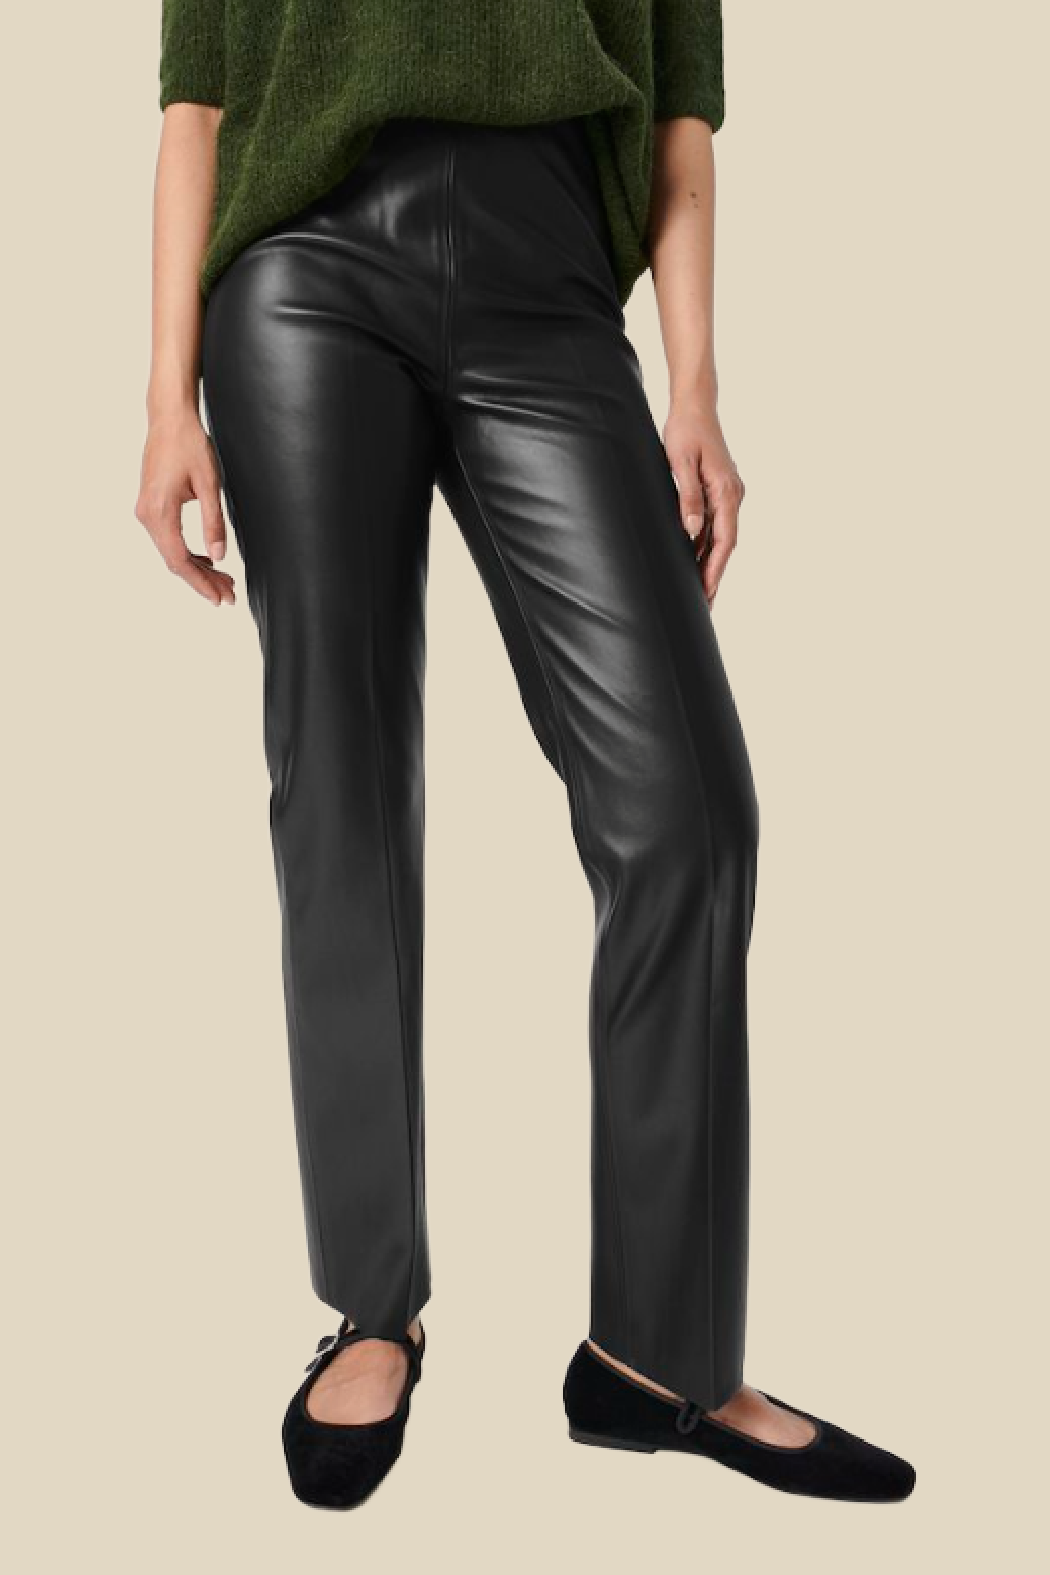 Buy MANGO Women Green Faux Leather Regular Fit Solid Trousers